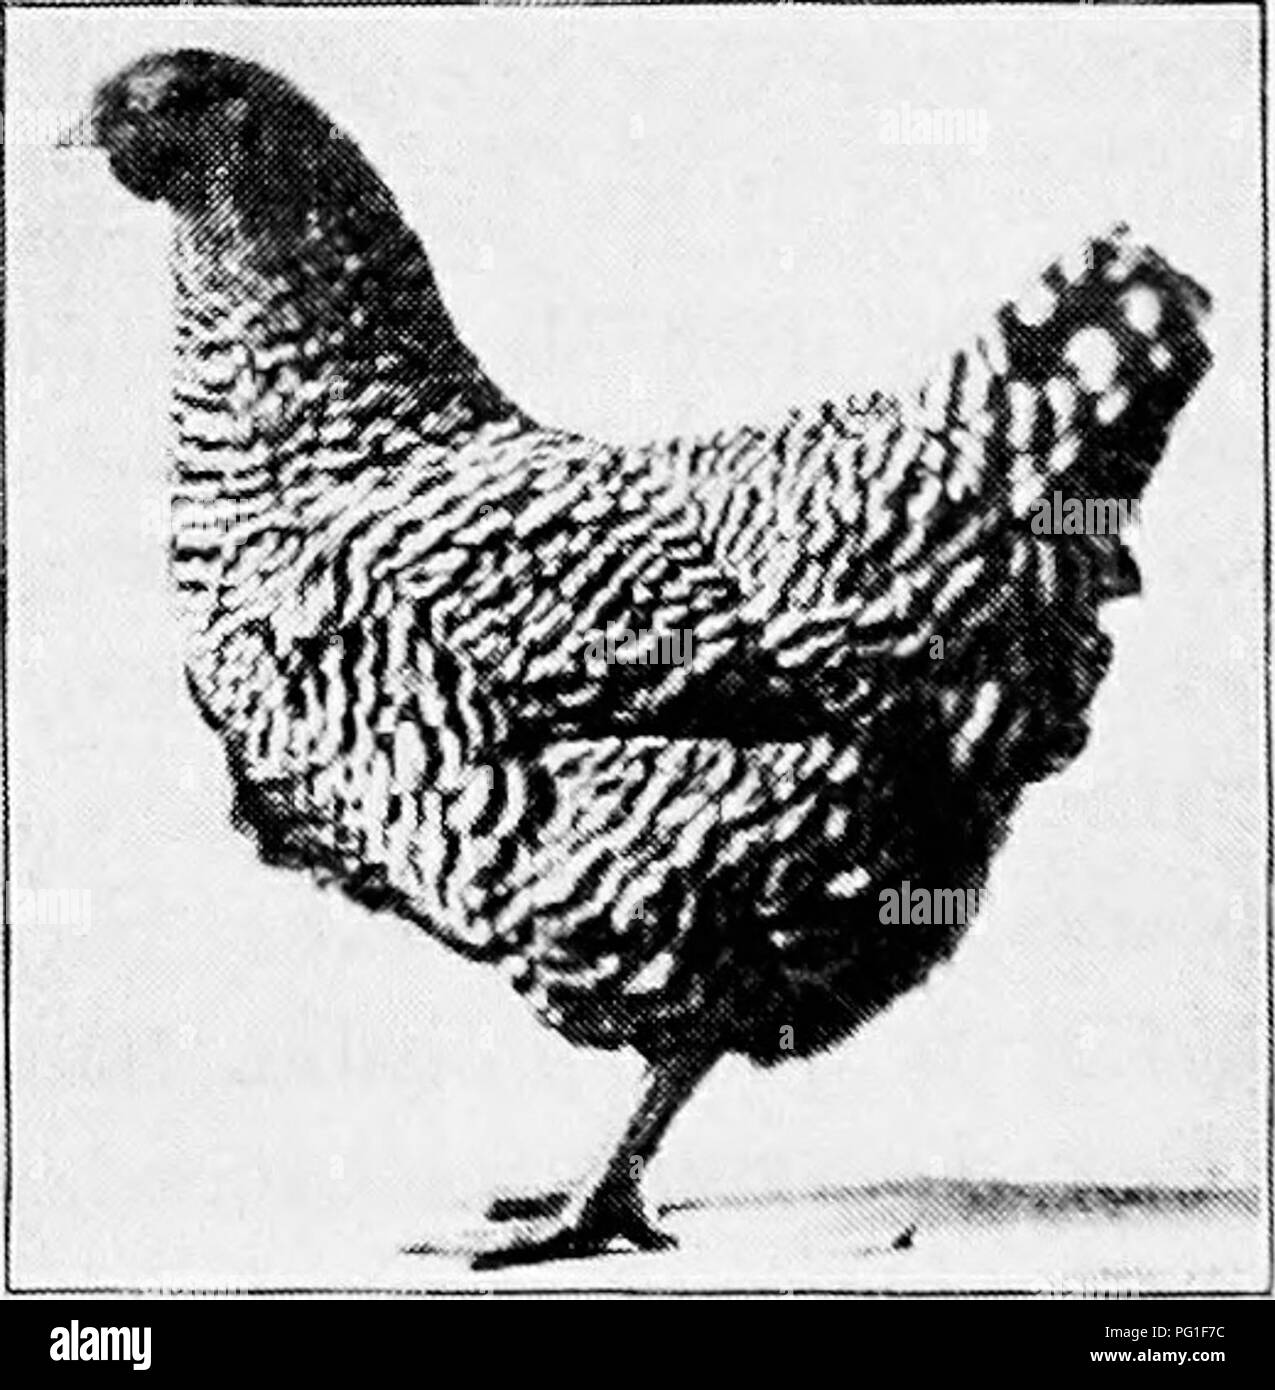 . Principles and practice of poultry culture . Poultry. 396 POULTRY CULTURE &quot;% /'^ _;1 ^^^^^m ^*SM&amp; ^^y Uu Fig. 392. Dominique coclcerel. (Photograph from owner, W. H. Davenport, Coleraine, Massachusetts) Dominiqties, as devel- oped either by amalgama- tion of early barred types or by preference for the type which became fixed and dominant, were small medium-sized fowls with rose combs. In shape and carriage they resembled Hamburgs and Leghorns, though more substantially built. They were rugged and hardy, good layers, fattened well, and made good table poultry. The males were much lig Stock Photo